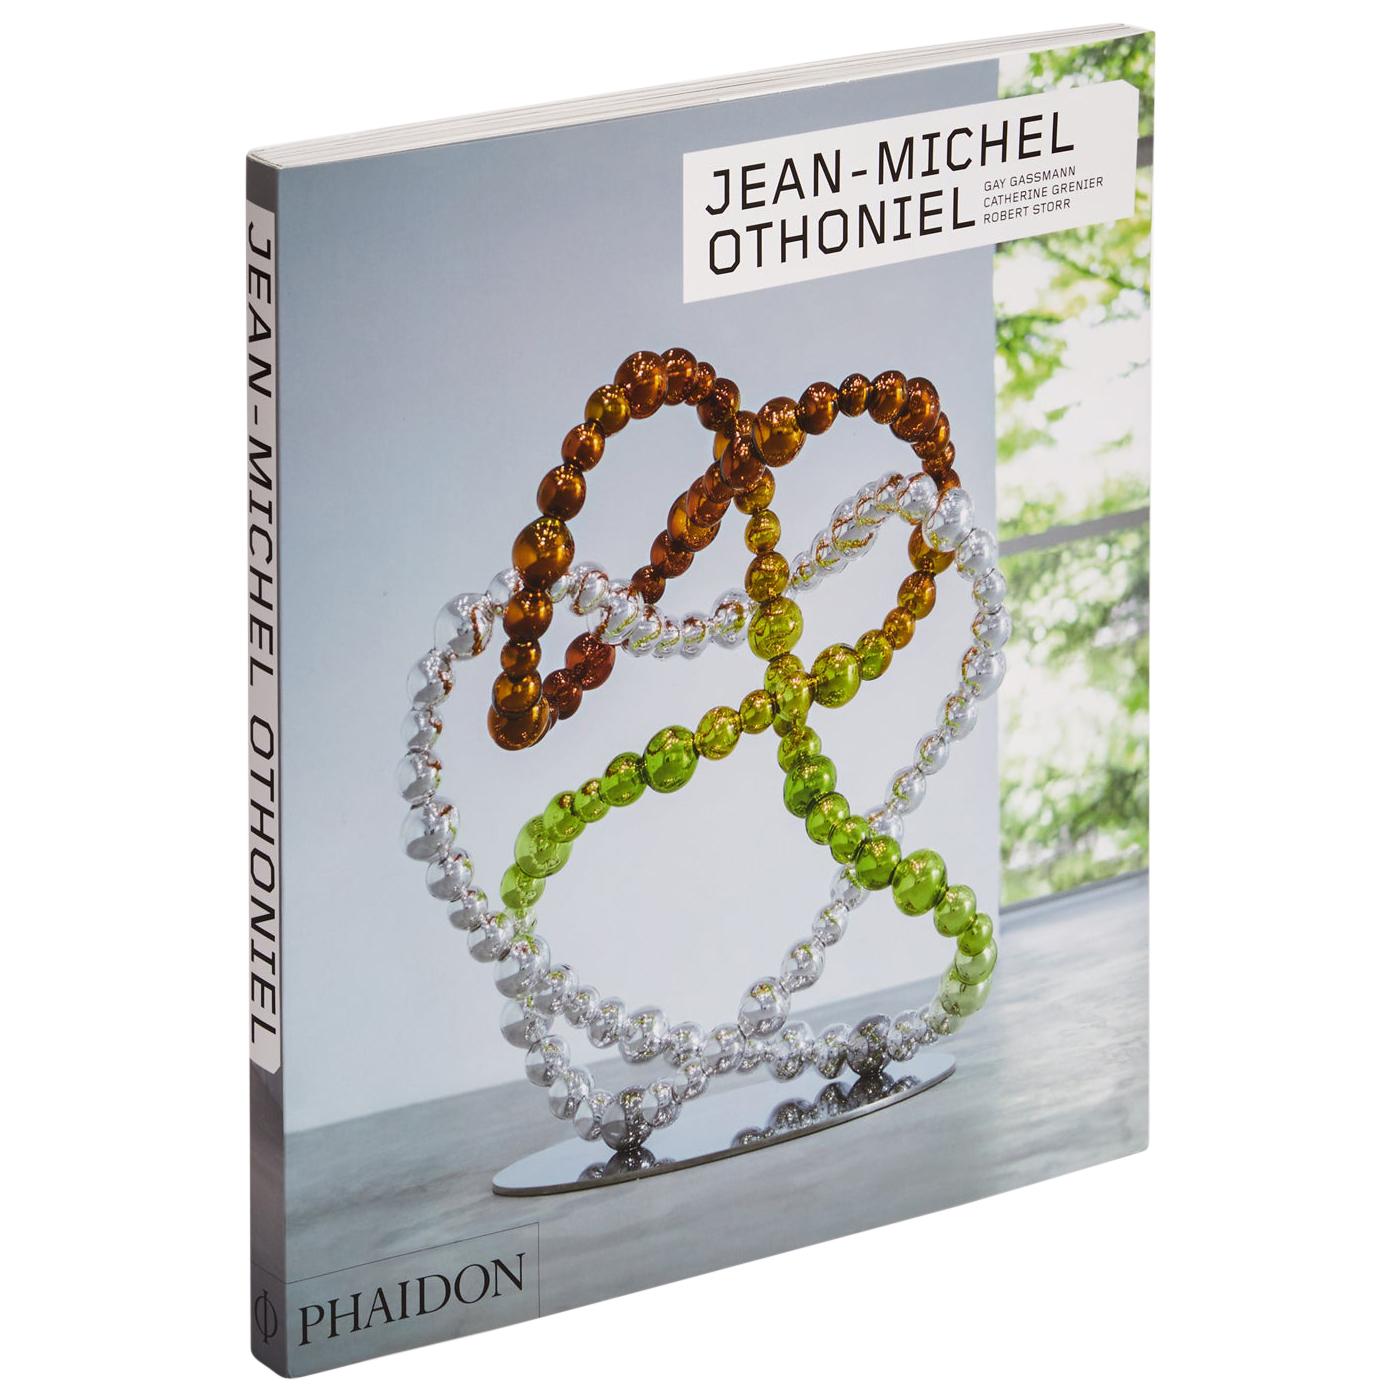 Jean-Michel Othoniel 'Phaidon Contemporary Artists Series' For Sale